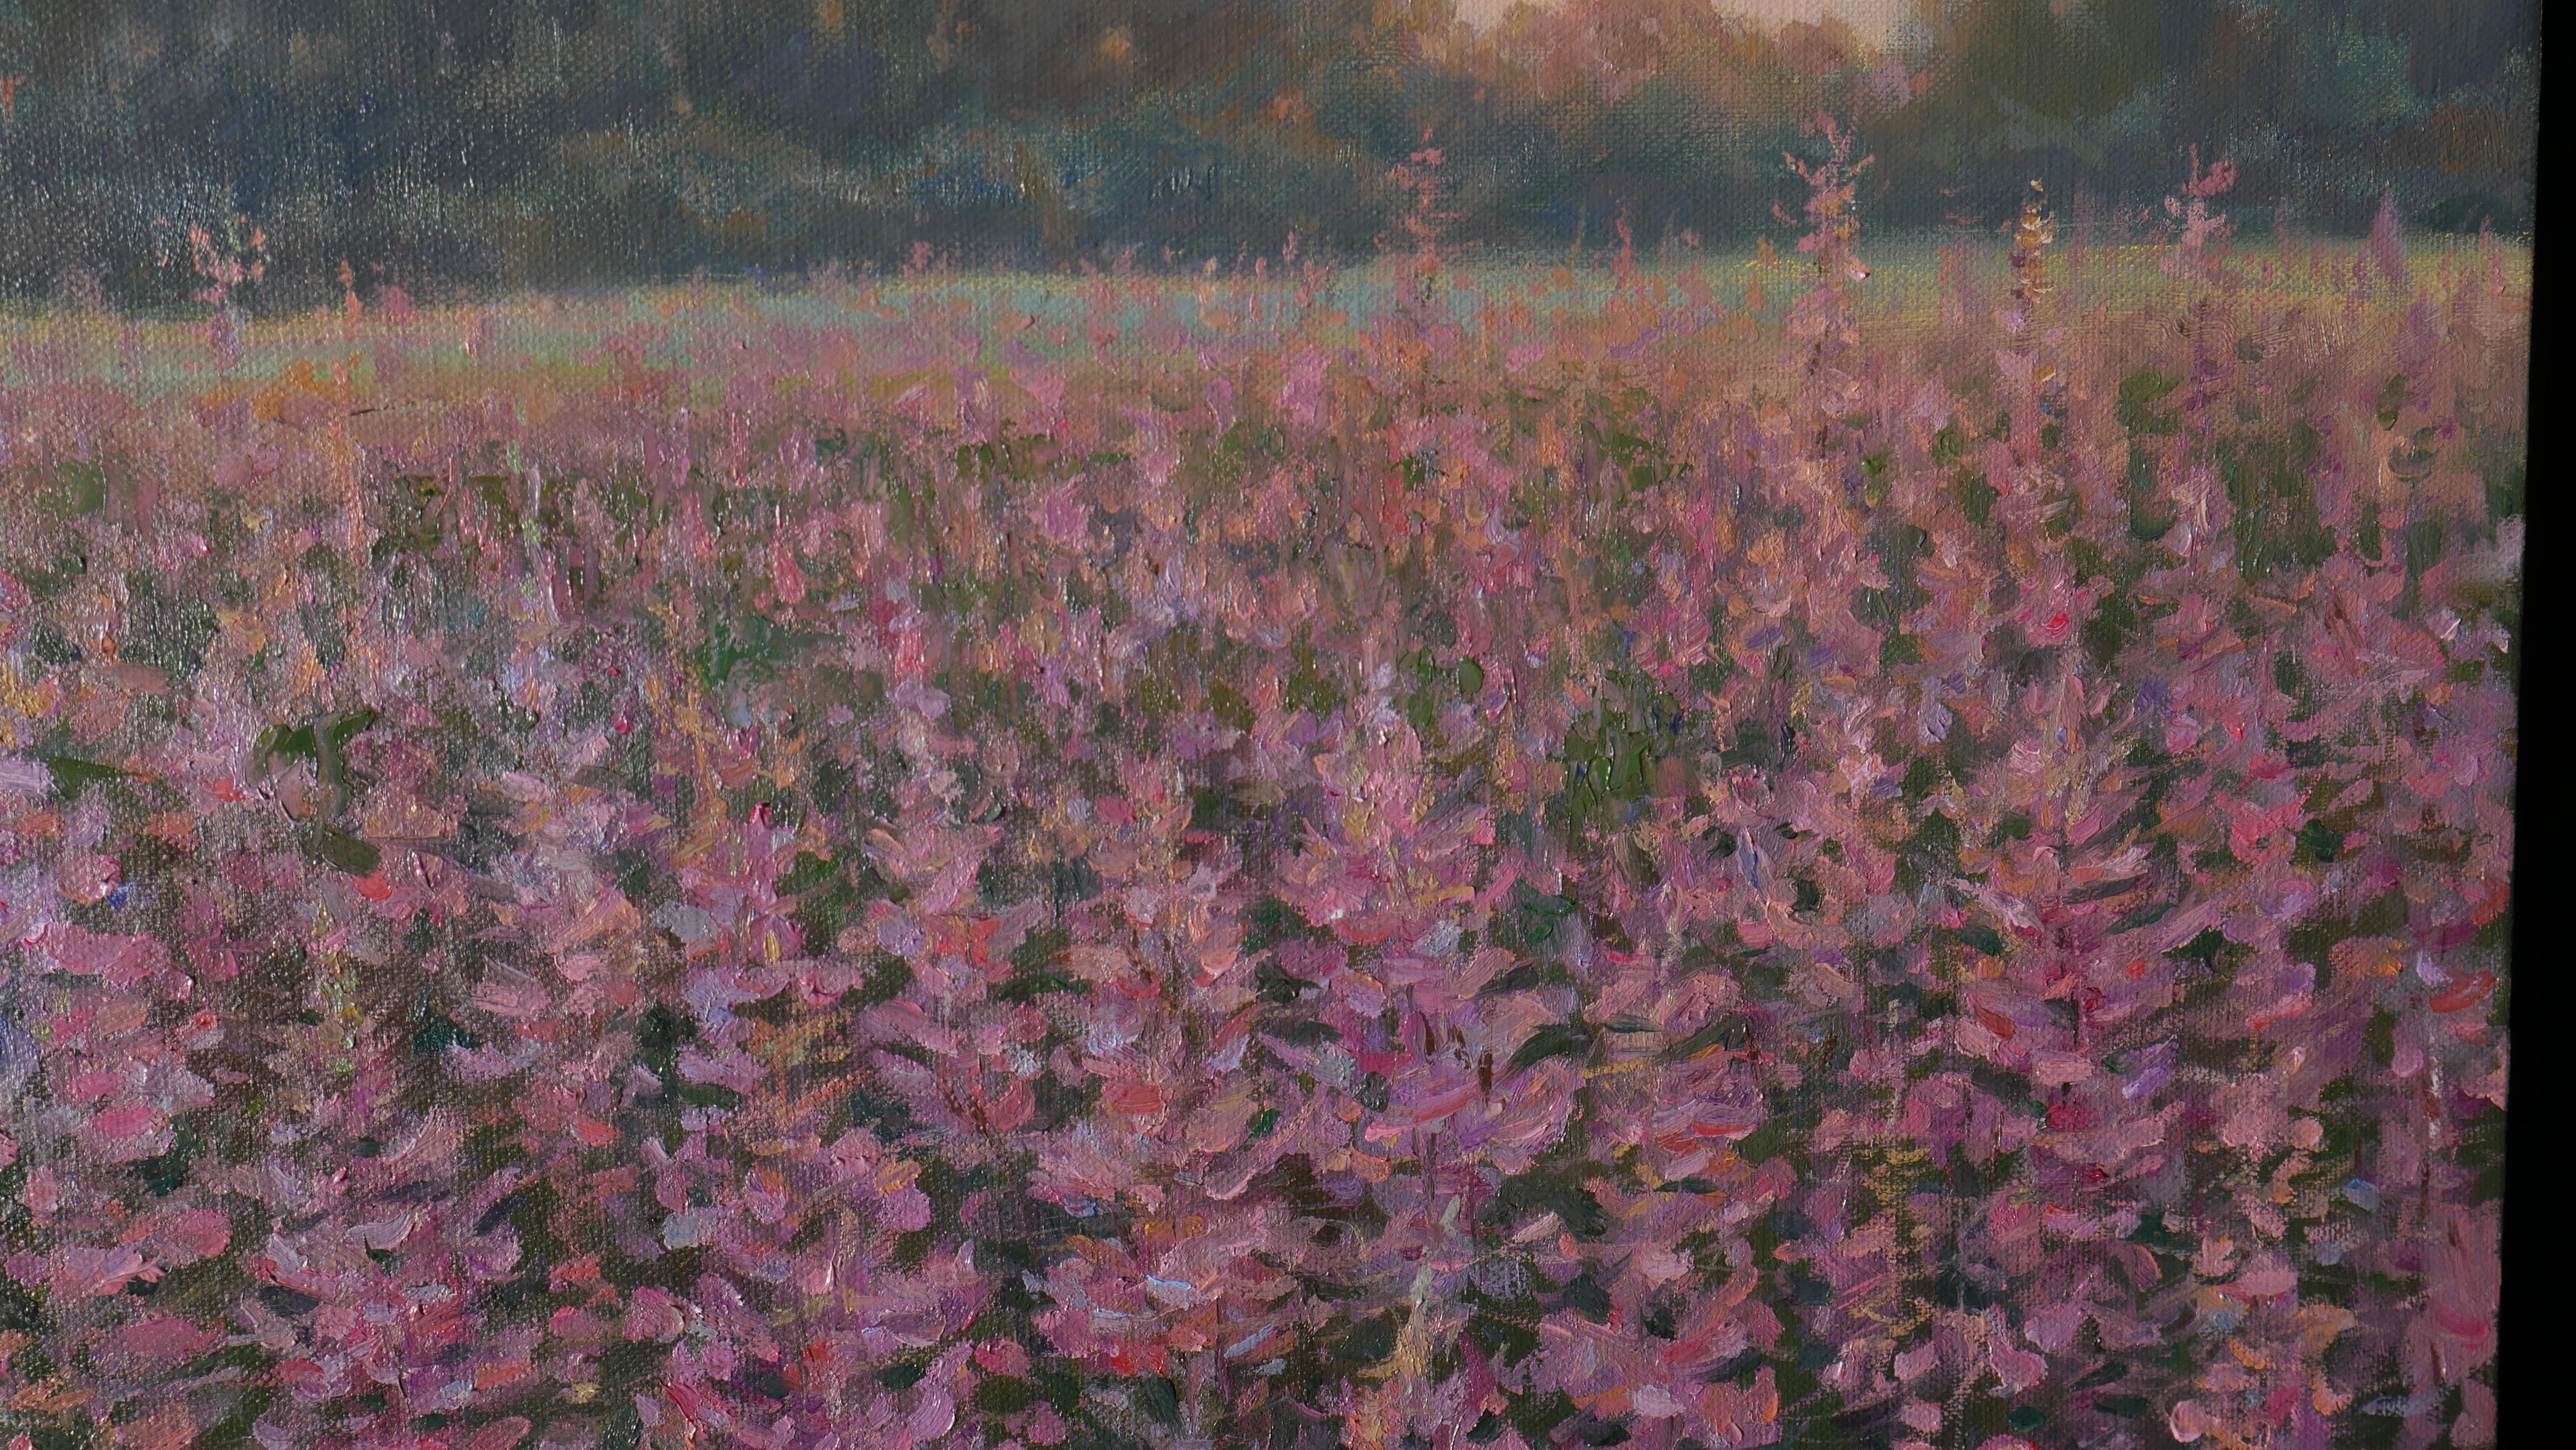 Sunset Over The Fireweed Field - sunset landscape painting For Sale 4